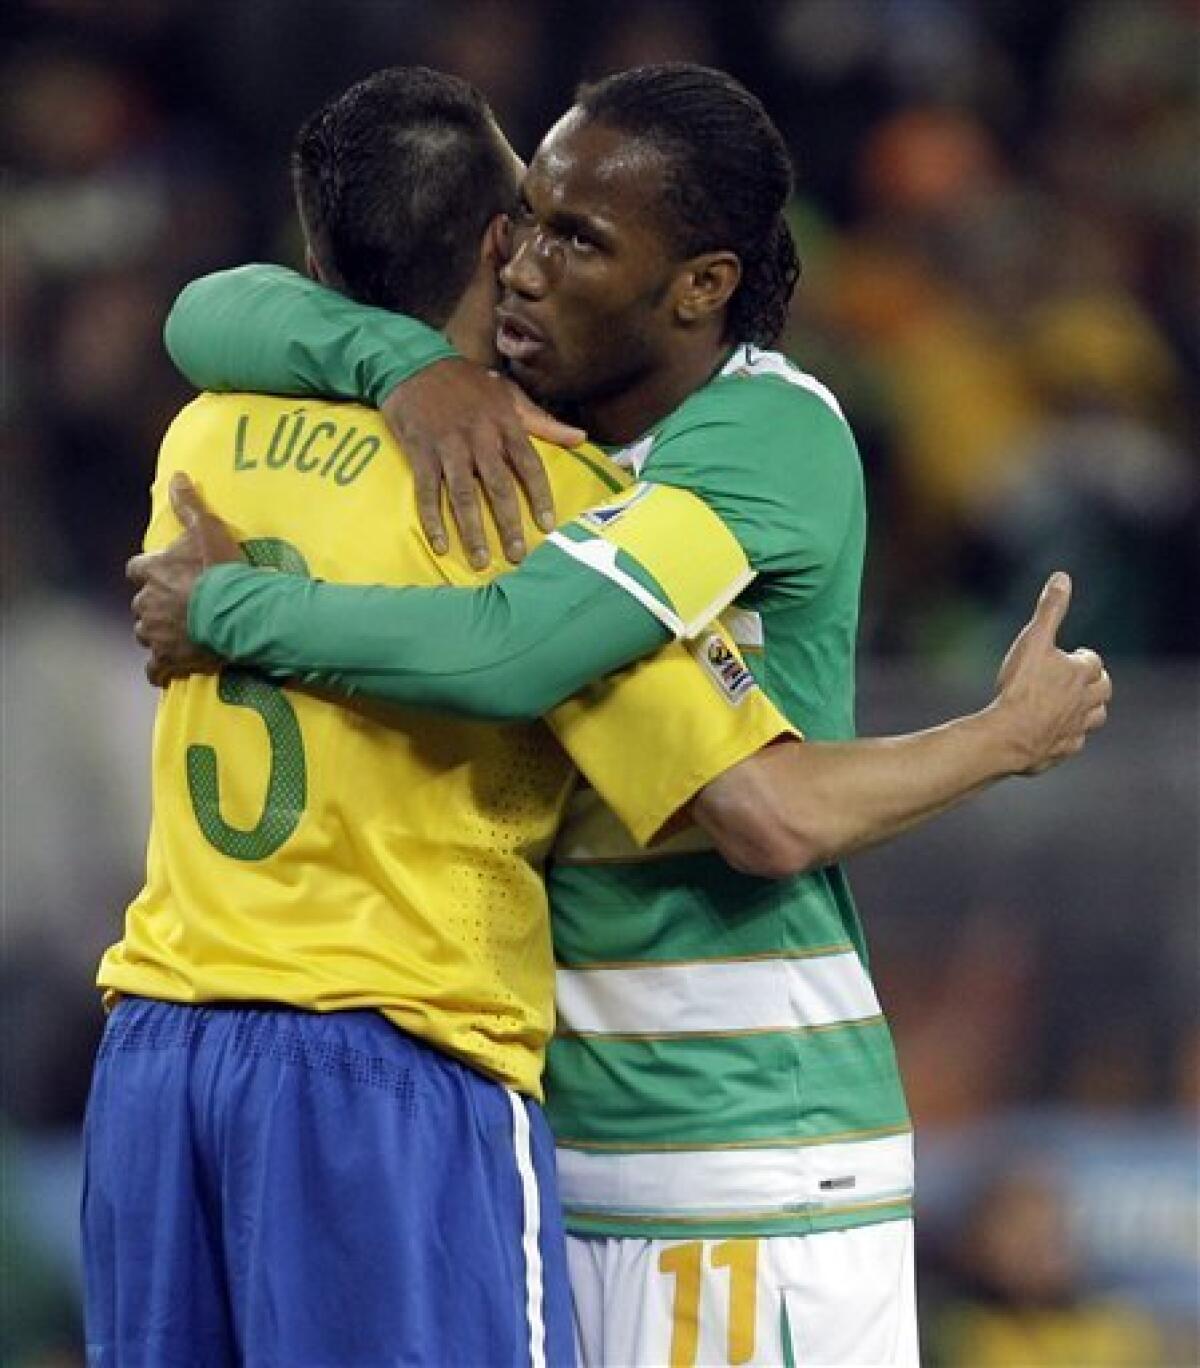 Ivory Coast's Didier Drogba, right, hugs Brazil's Lucio after the World Cup group G soccer match between Brazil and Ivory Coast at Soccer City in Johannesburg, South Africa, Sunday, June 20, 2010. Brazil won 3-1. (AP Photo/Yves Logghe)